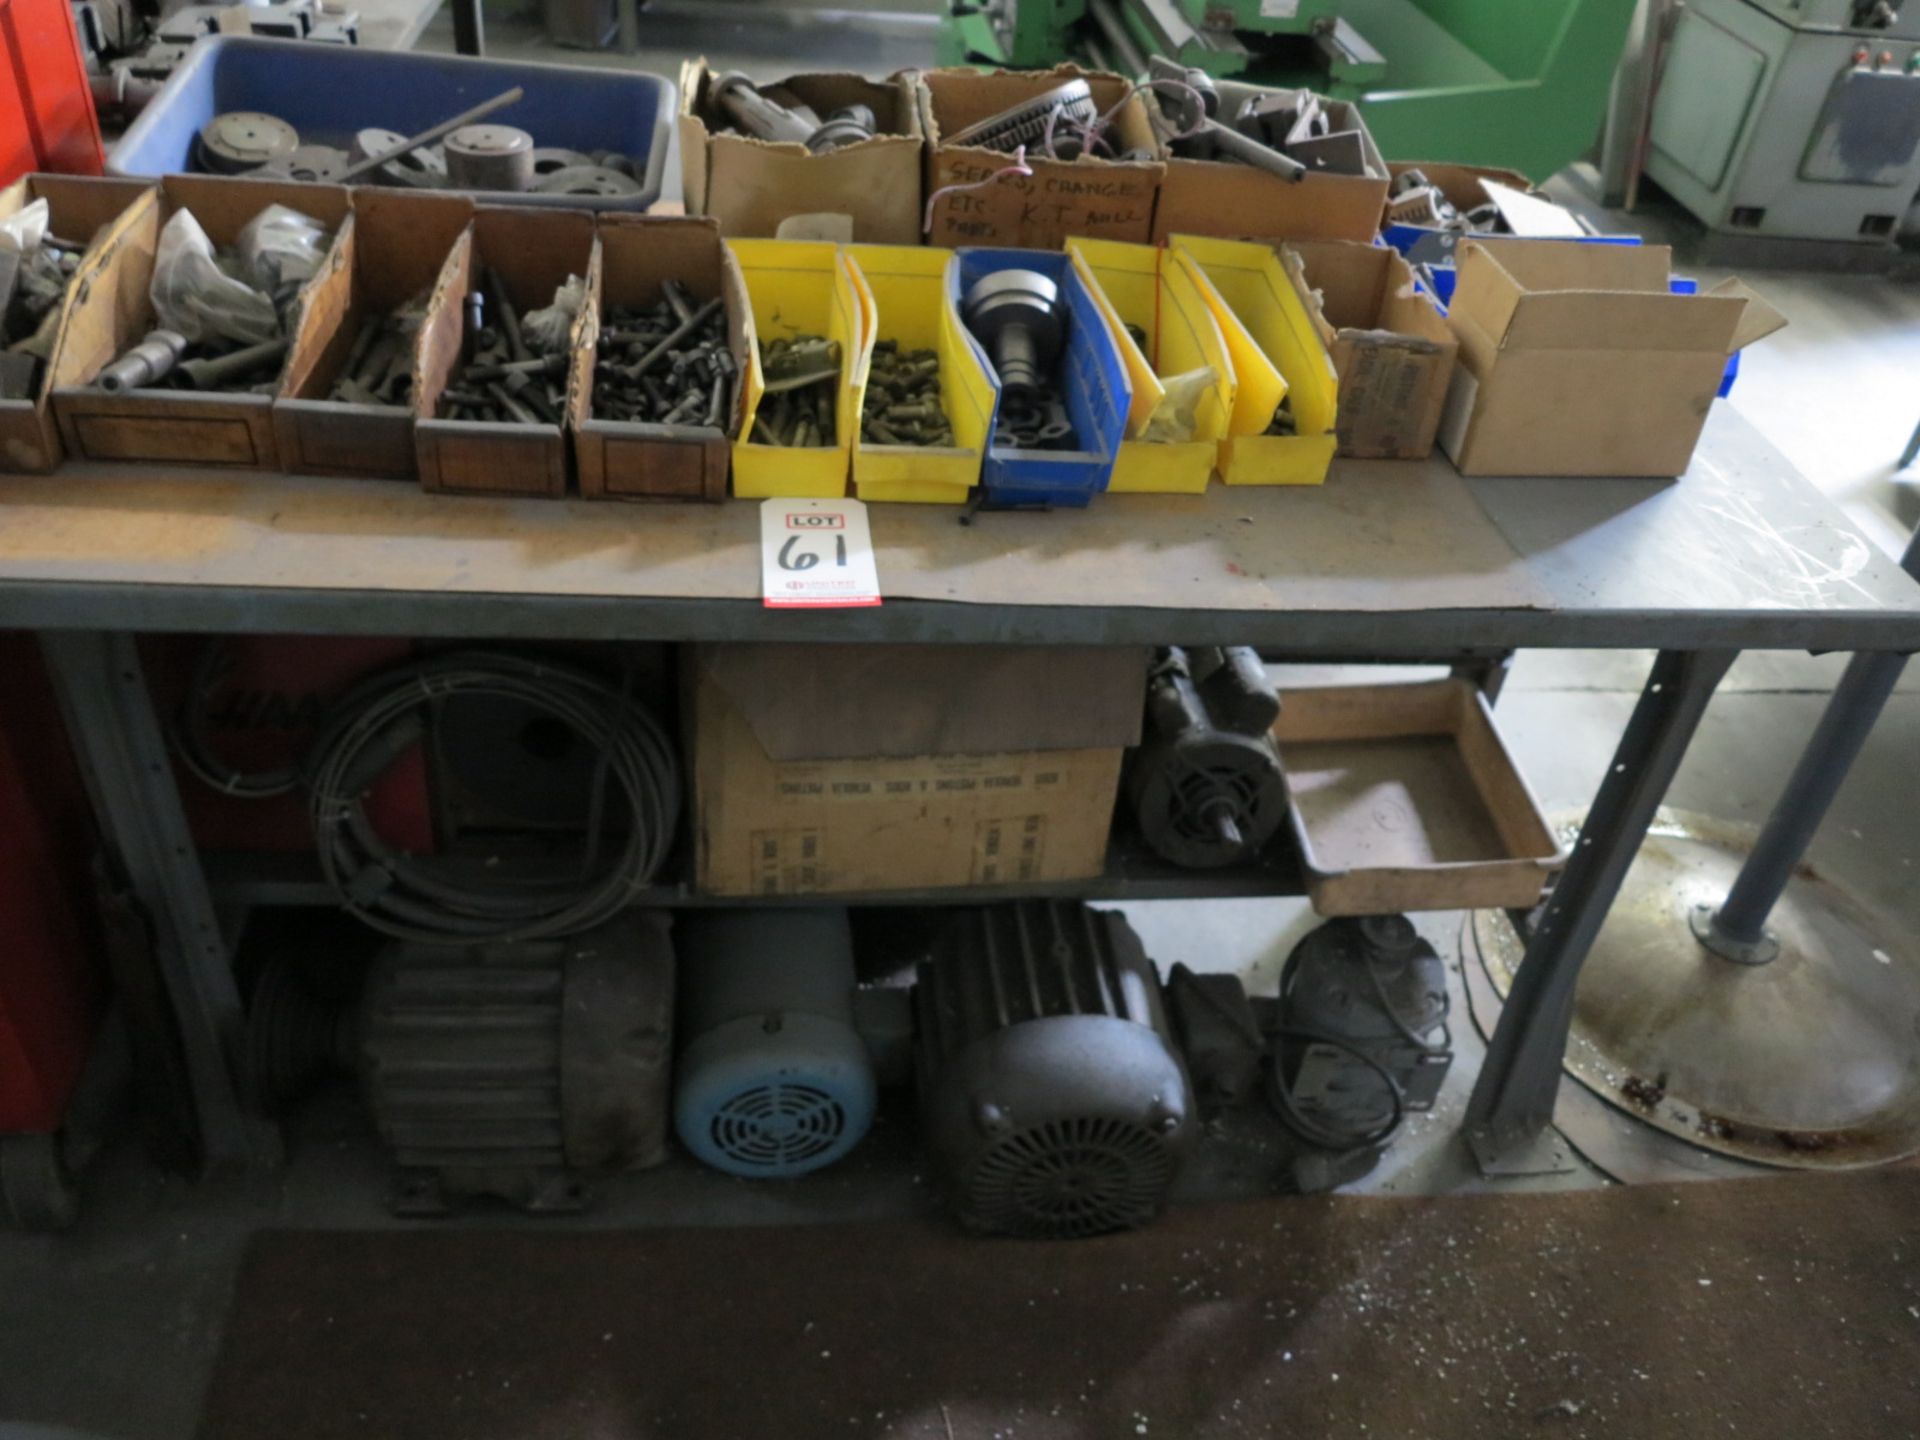 LOT - TABLE, W/ CONTENTS TO INCLUDE: ELECTRIC MOTORS, BOLTS, CHUCK JAWS AND MISC PARTS